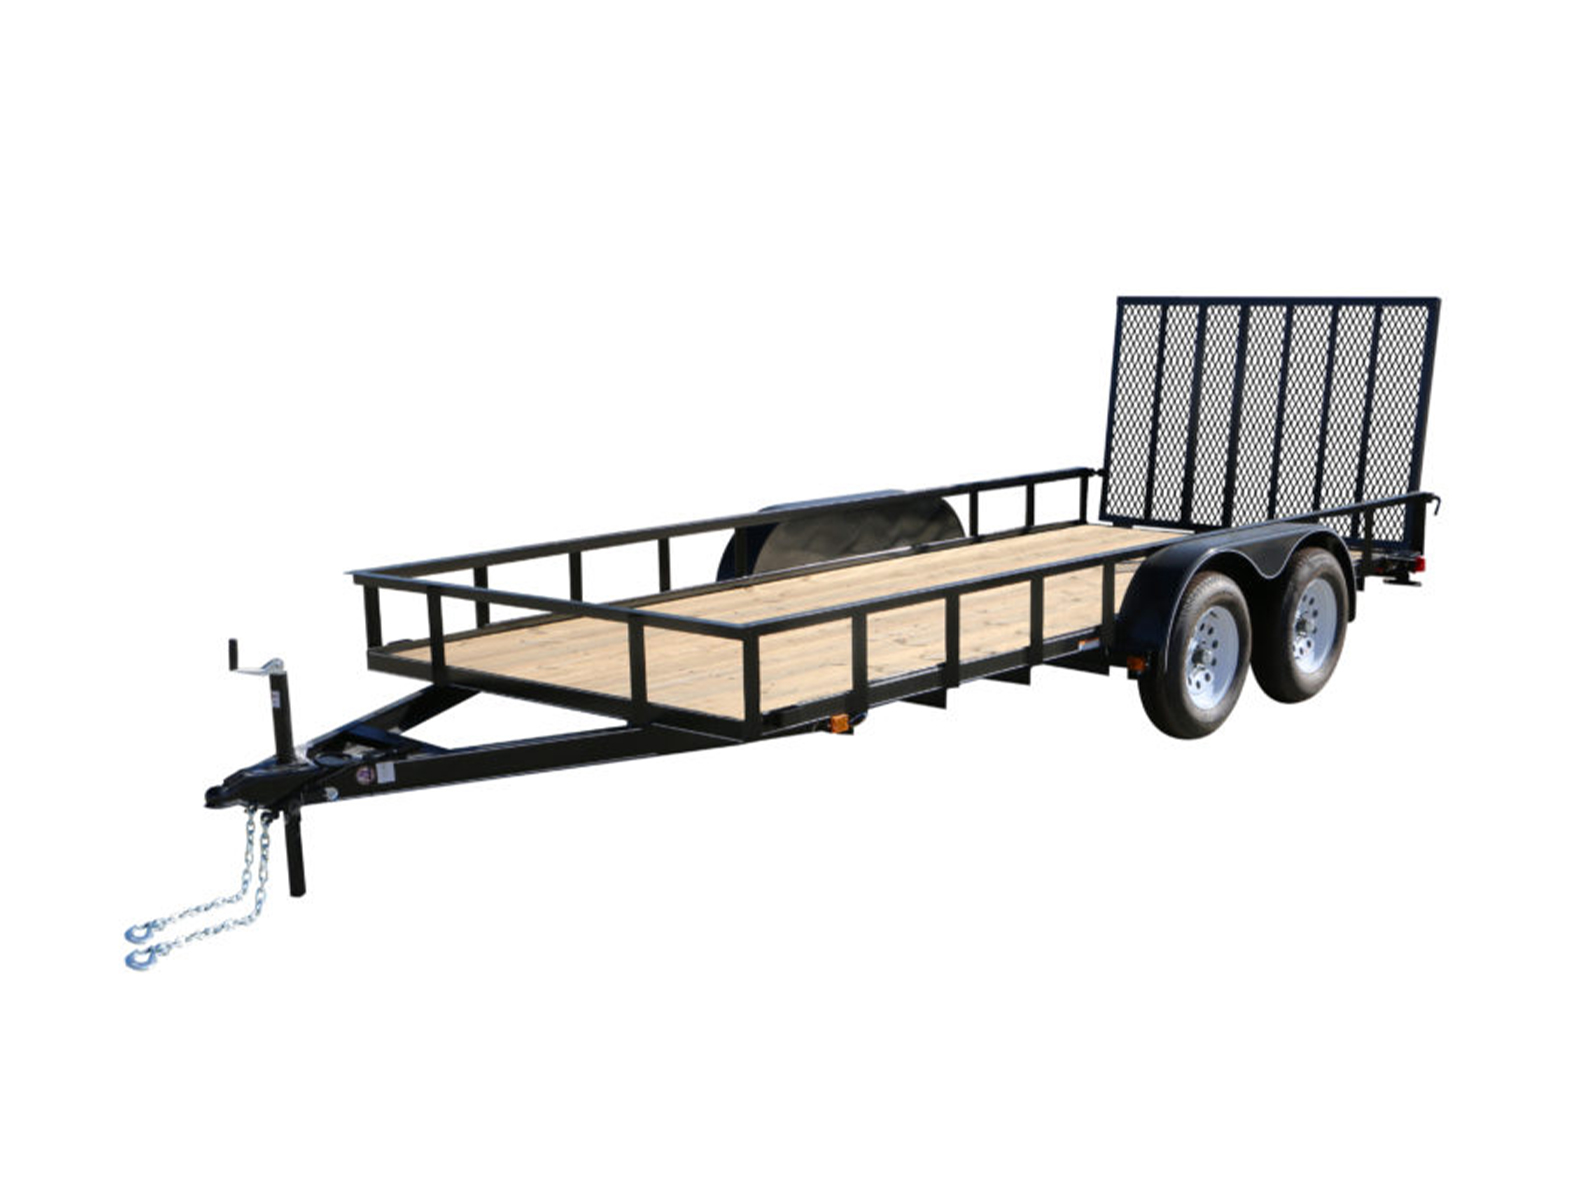 7K Tandem Axle Utility Trailer with wood floor and gate